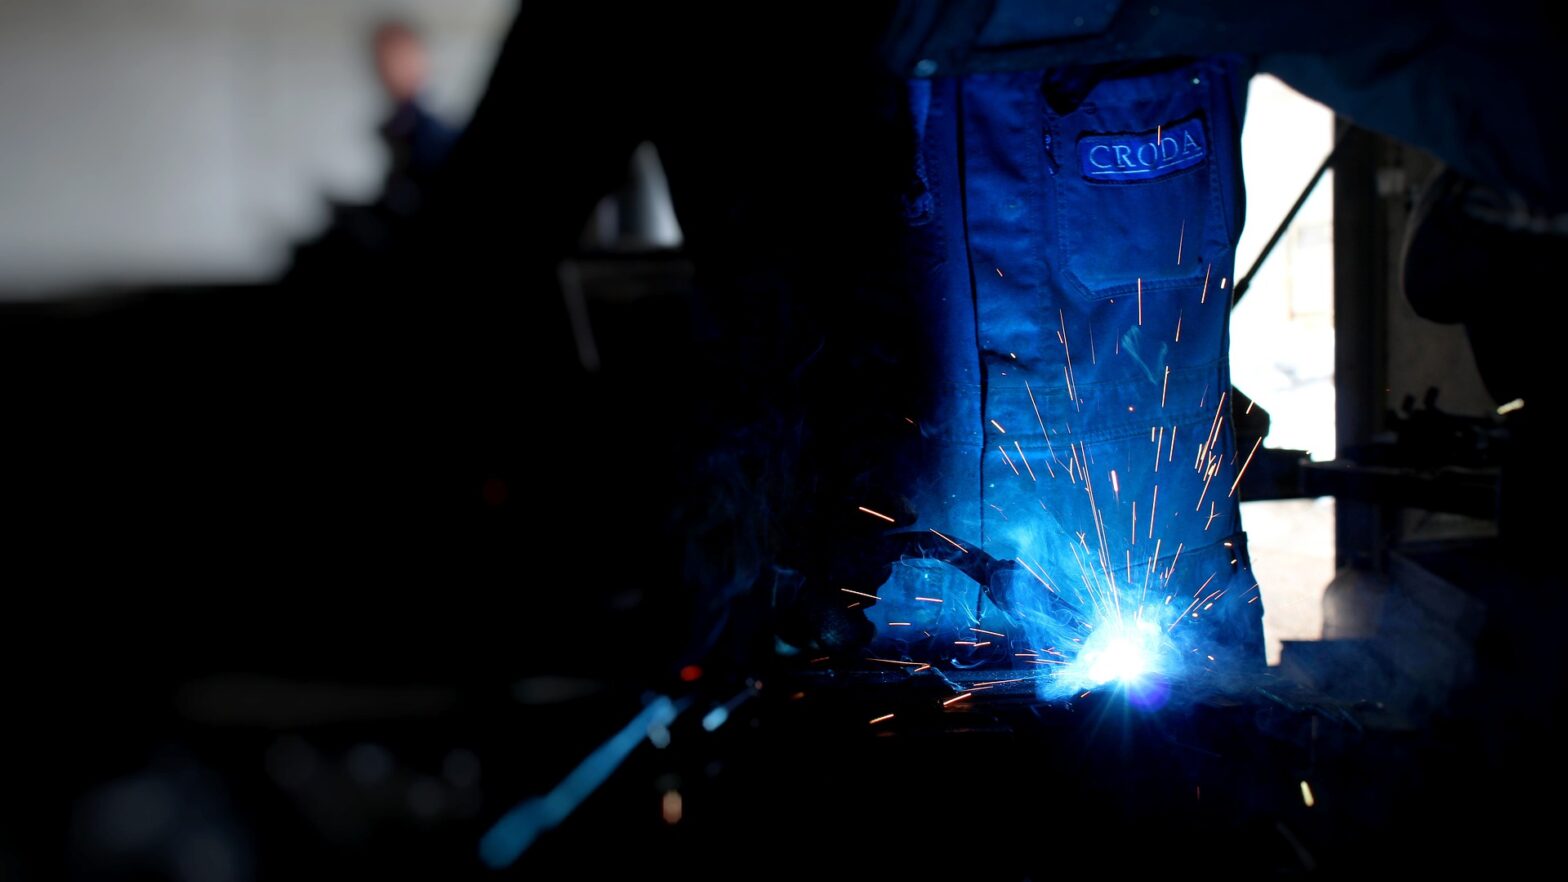 An image of someone welding